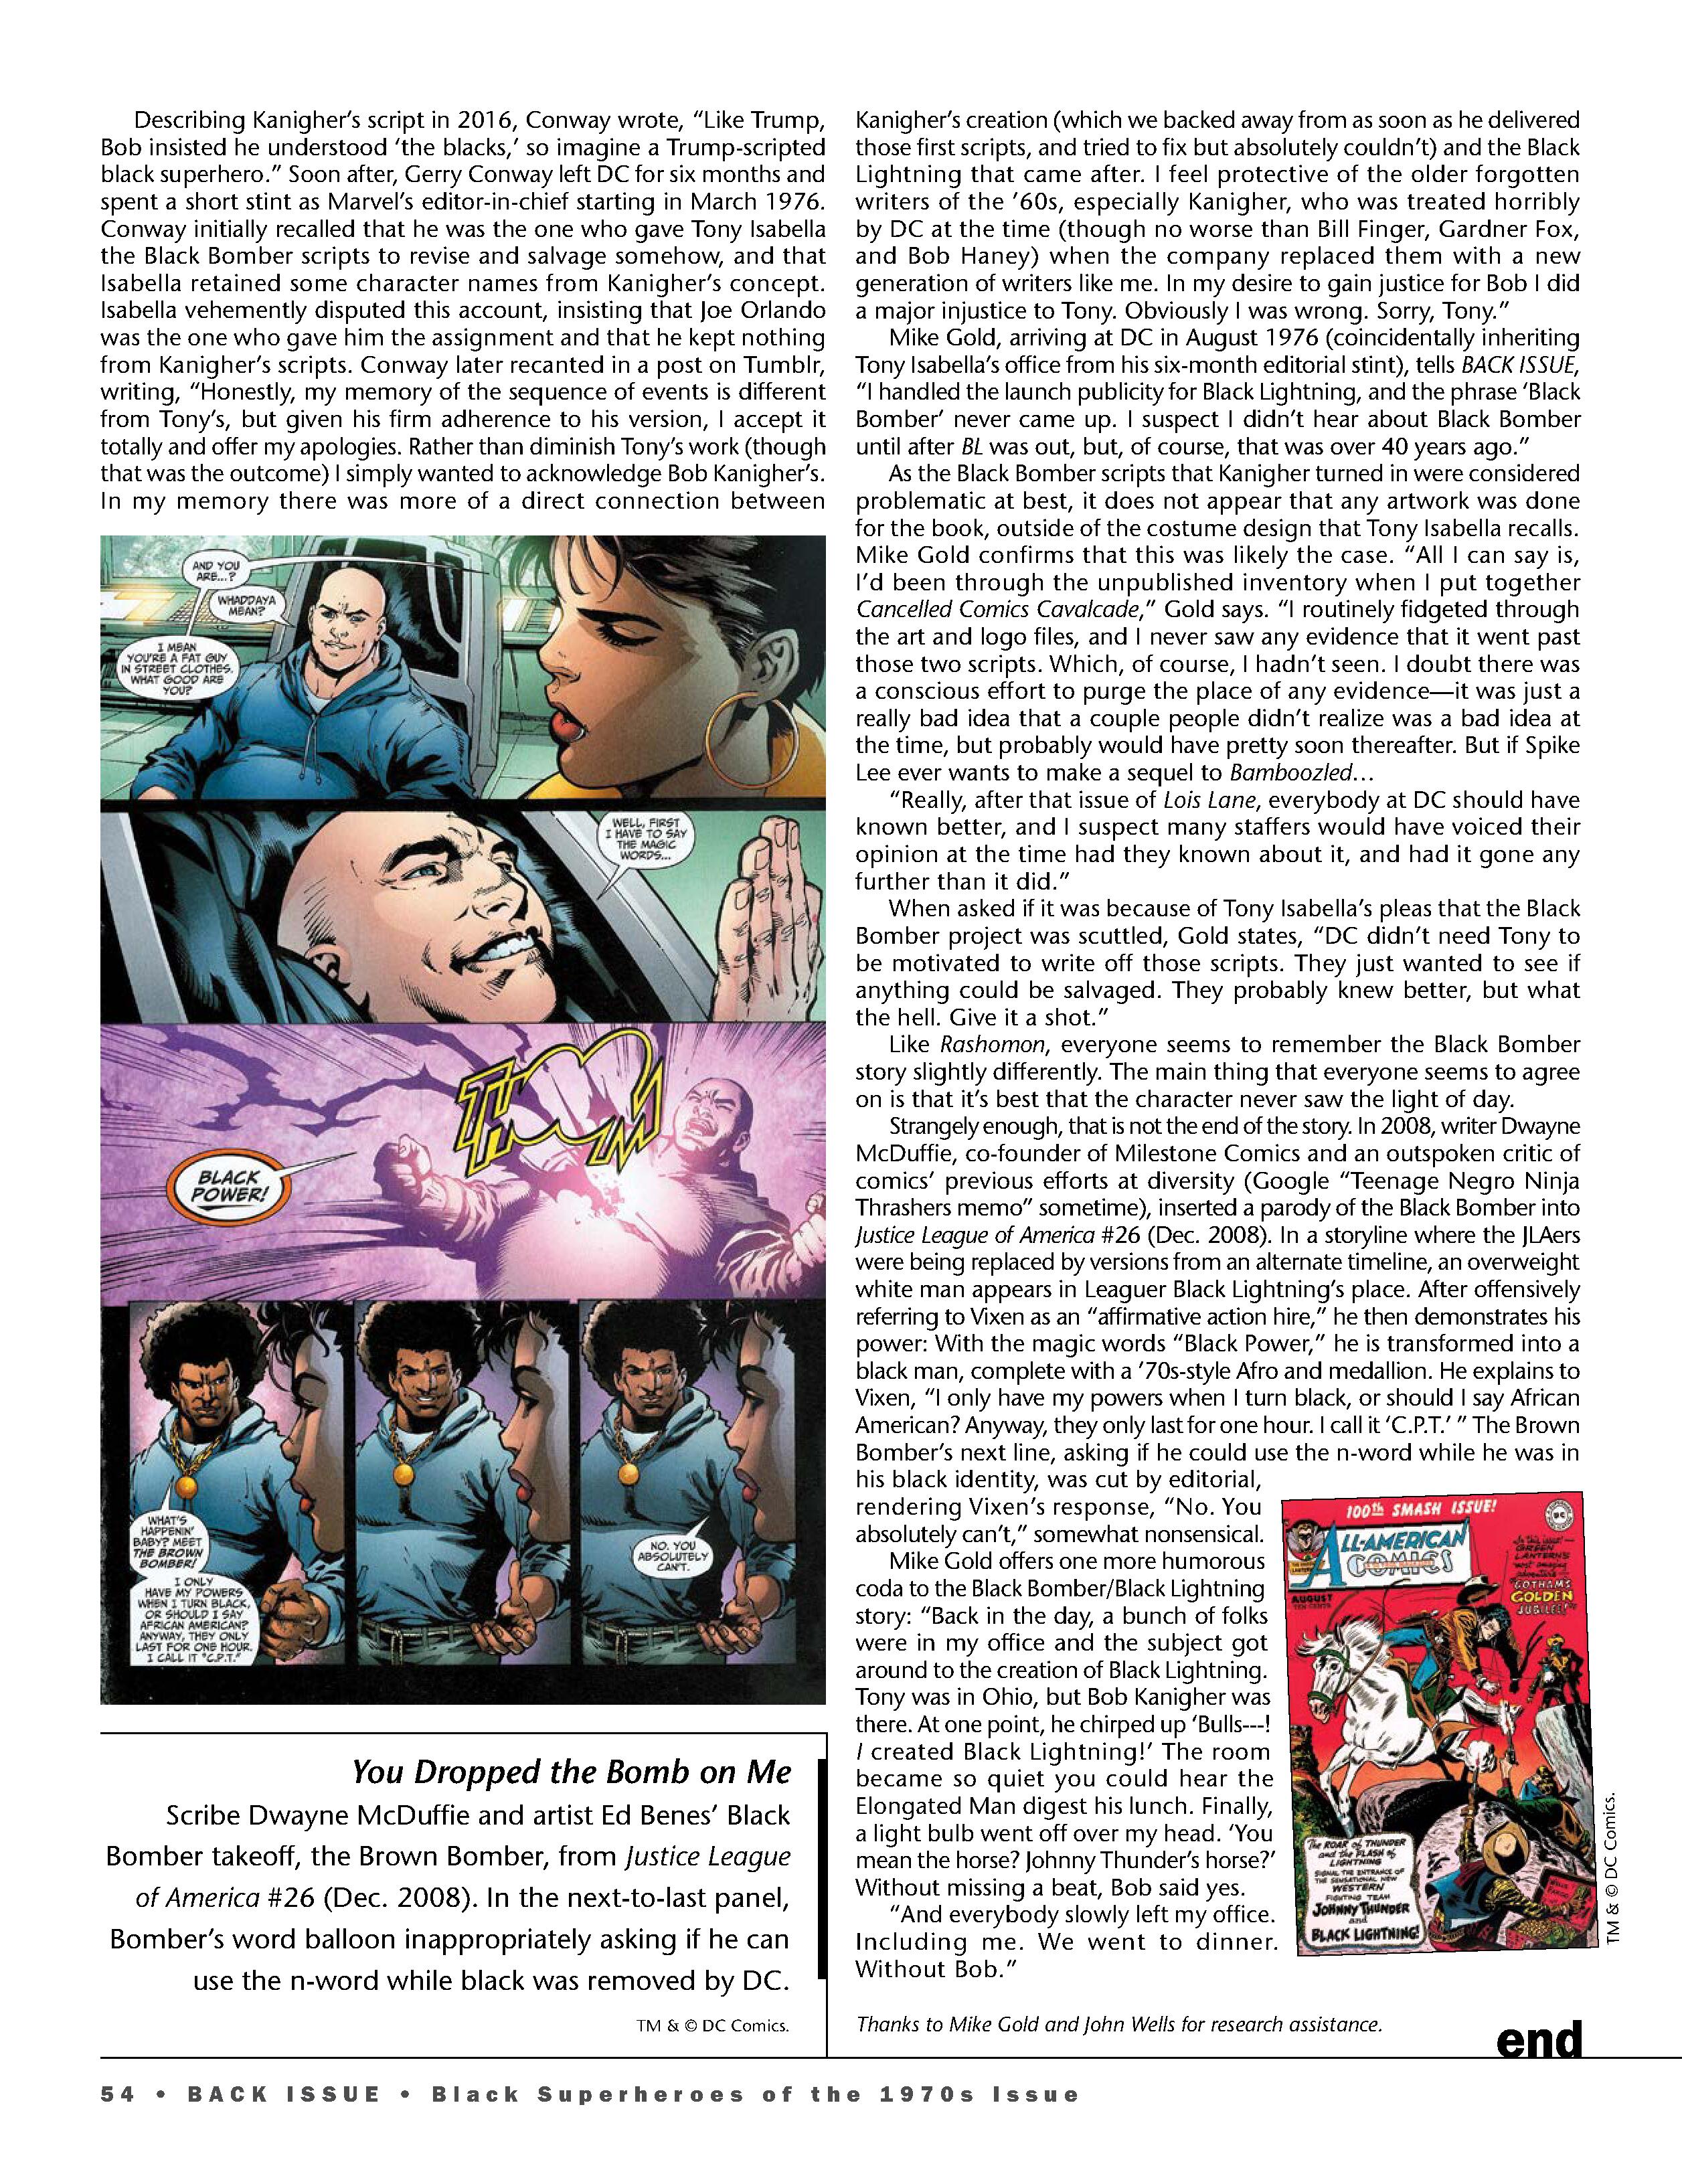 Read online Back Issue comic -  Issue #114 - 56